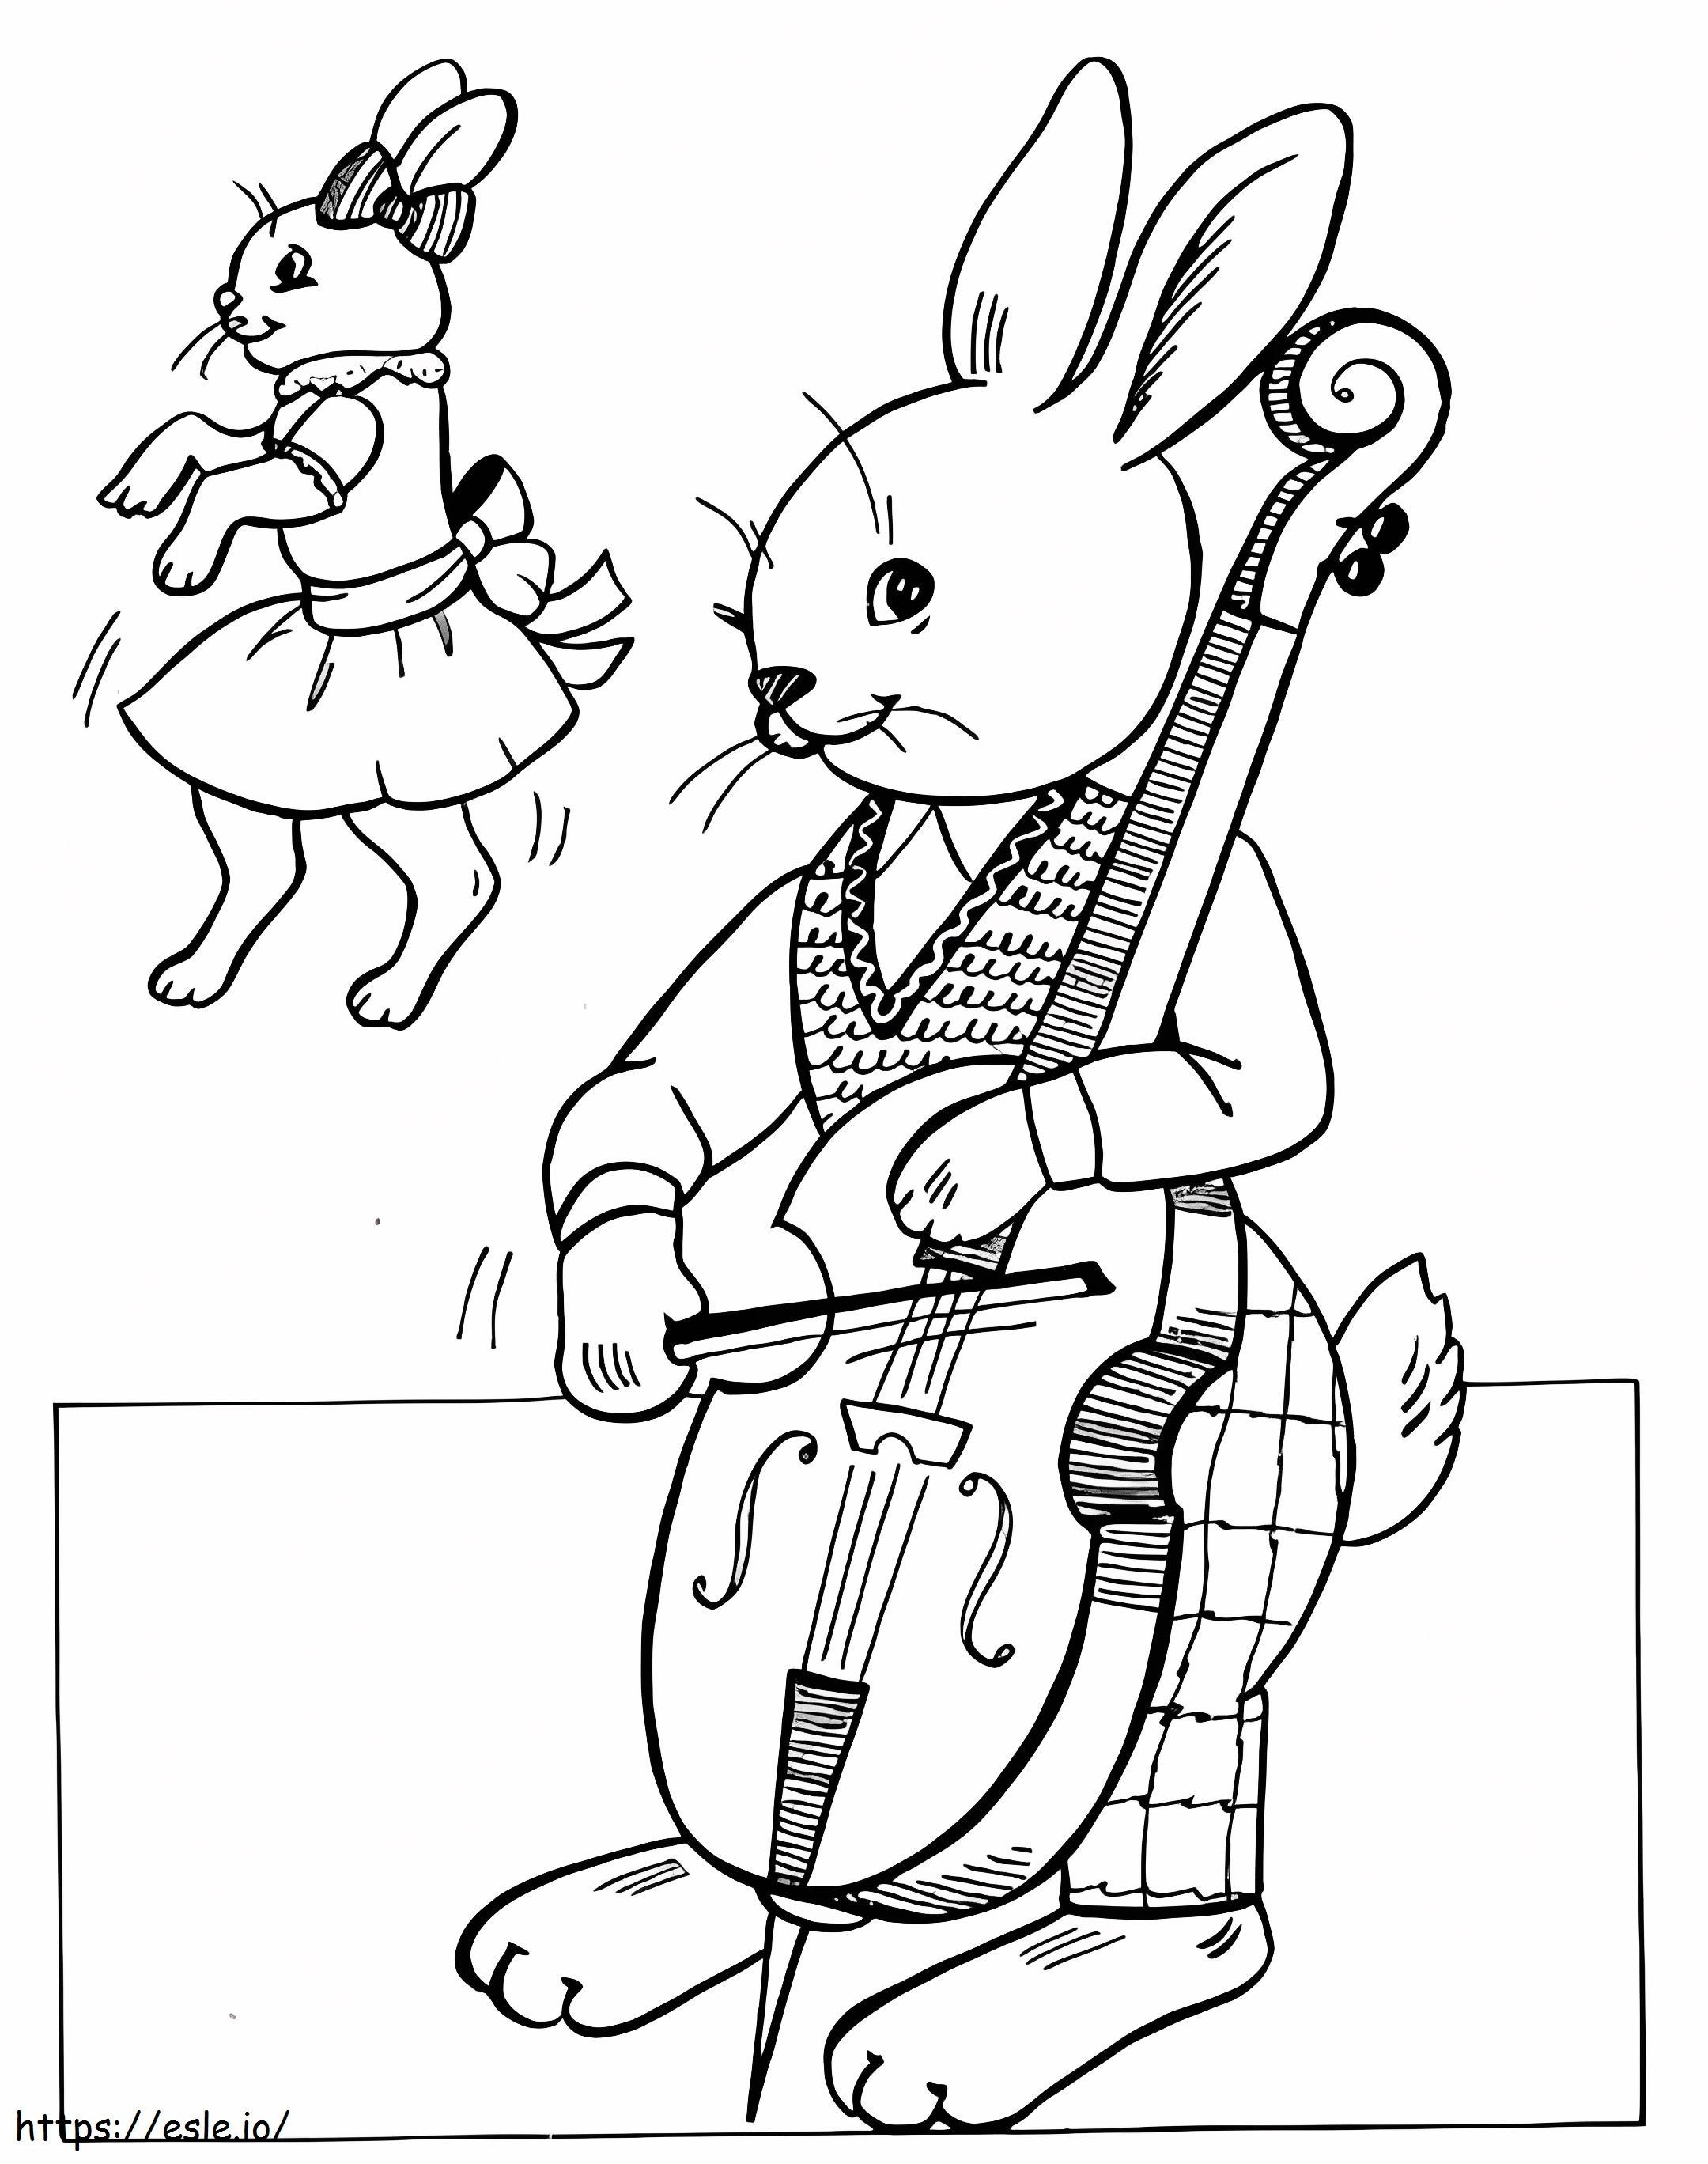 Bunny Playing Cello coloring page